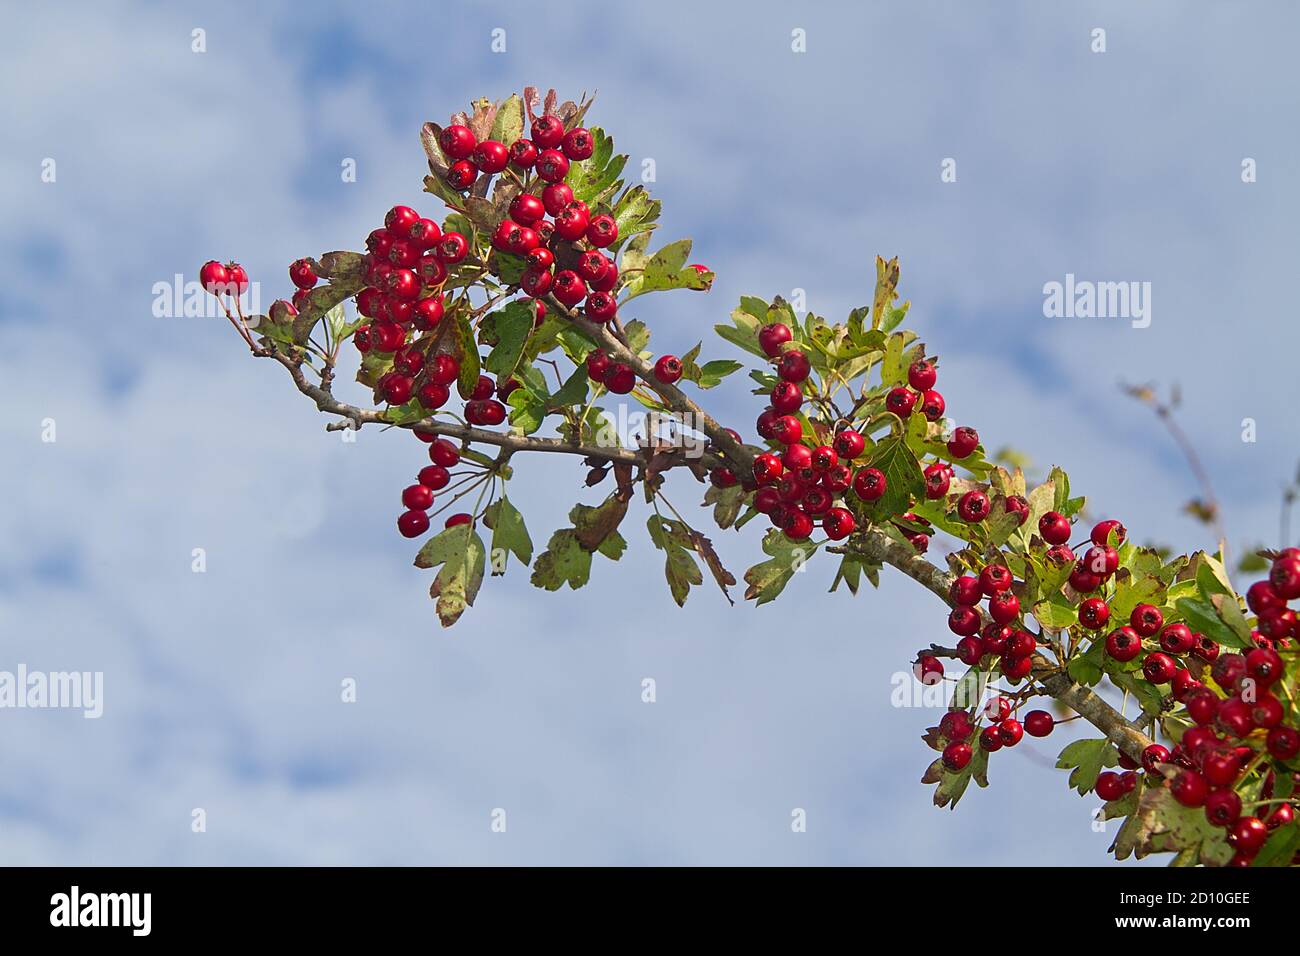 Branch of Common hawthorn, full of dark red berries, against the sky Stock Photo